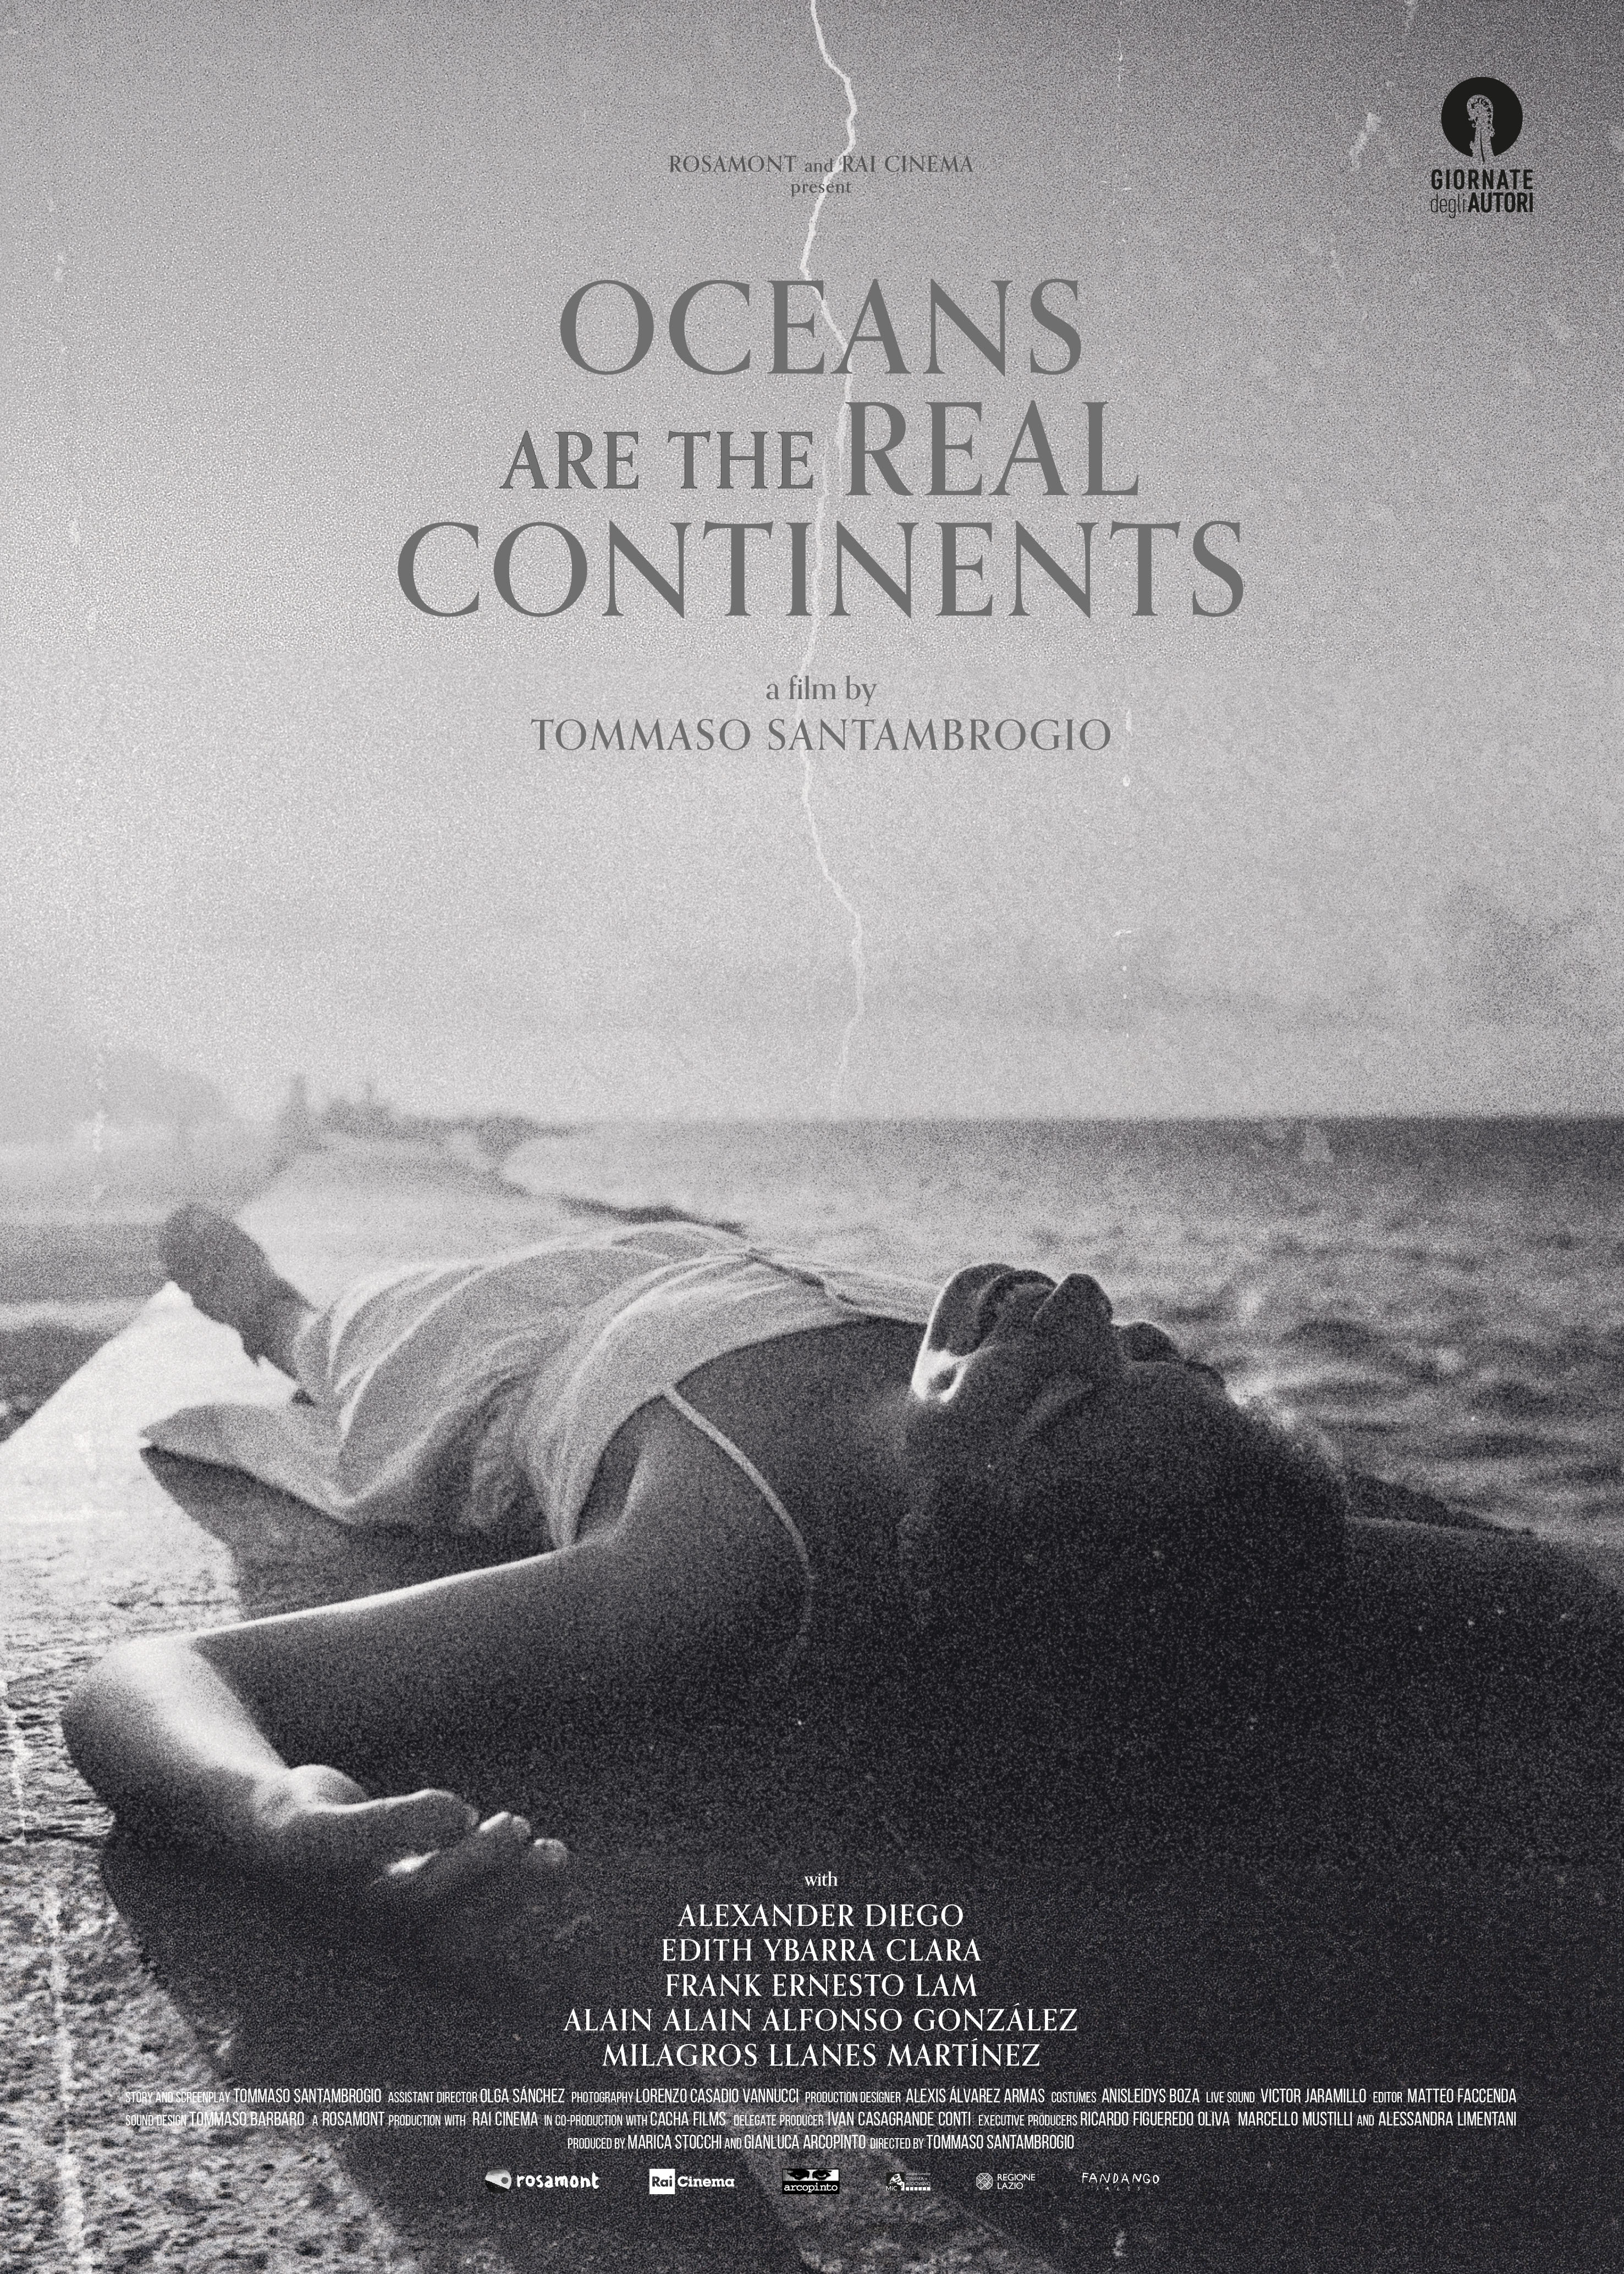 Oceans are the Real Continents